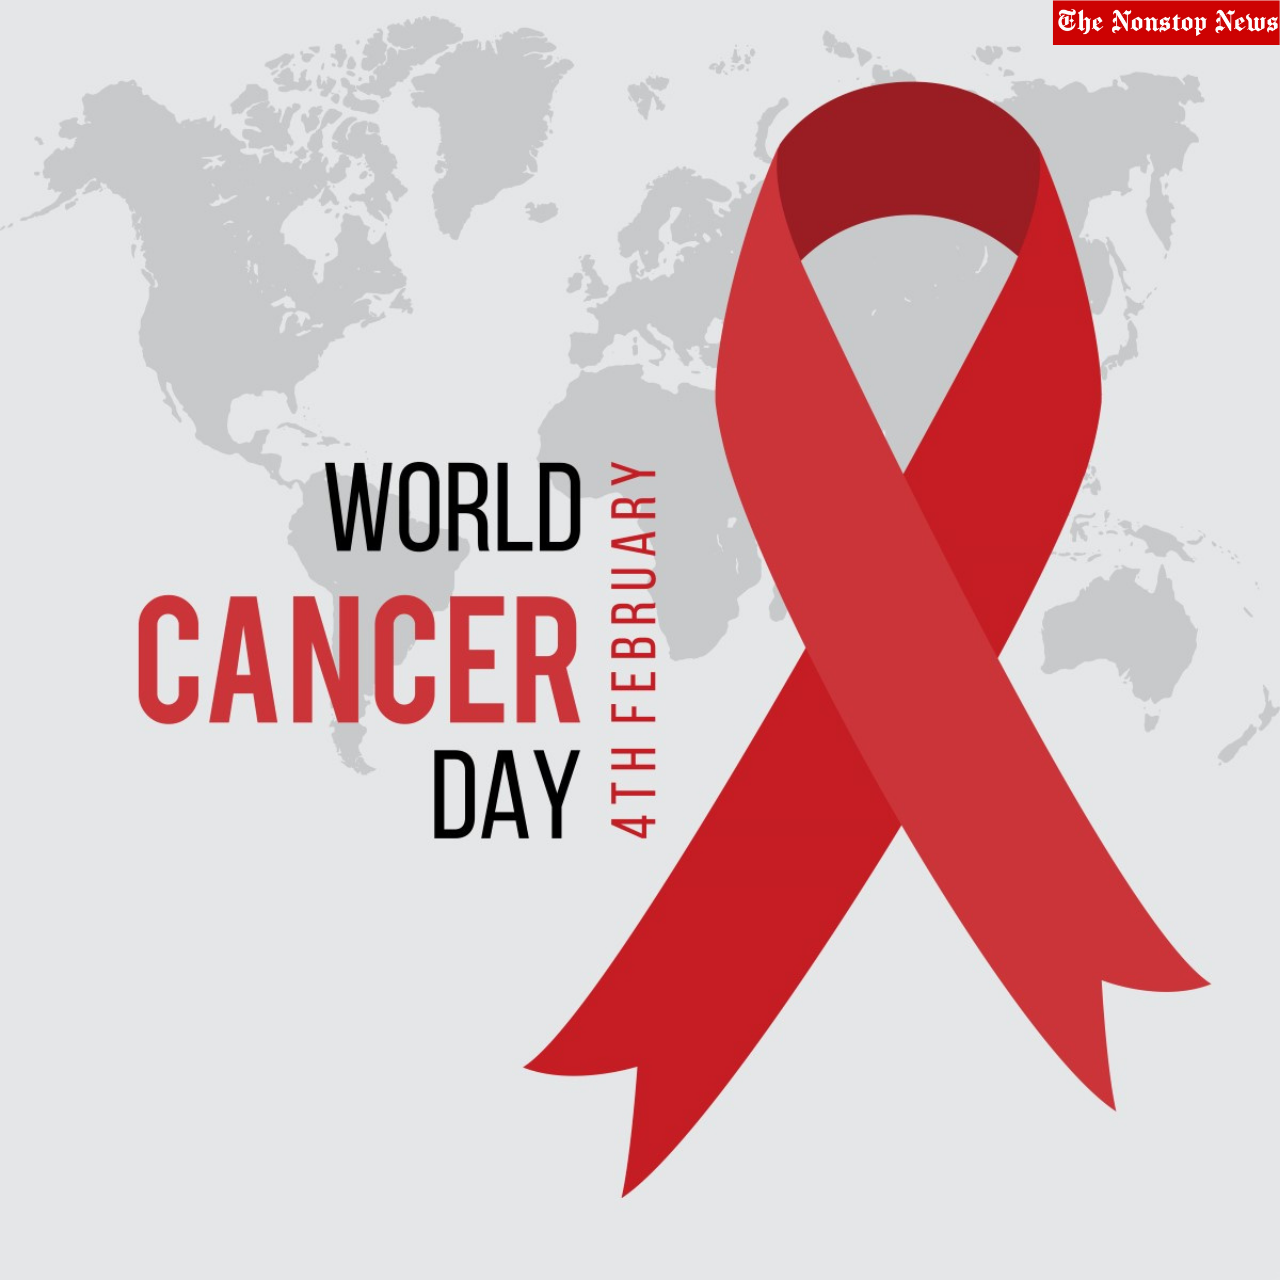 World Cancer Day 2022 Quotes, Slogans, Messages, Posters, HD Images, Wishes to Create Awareness